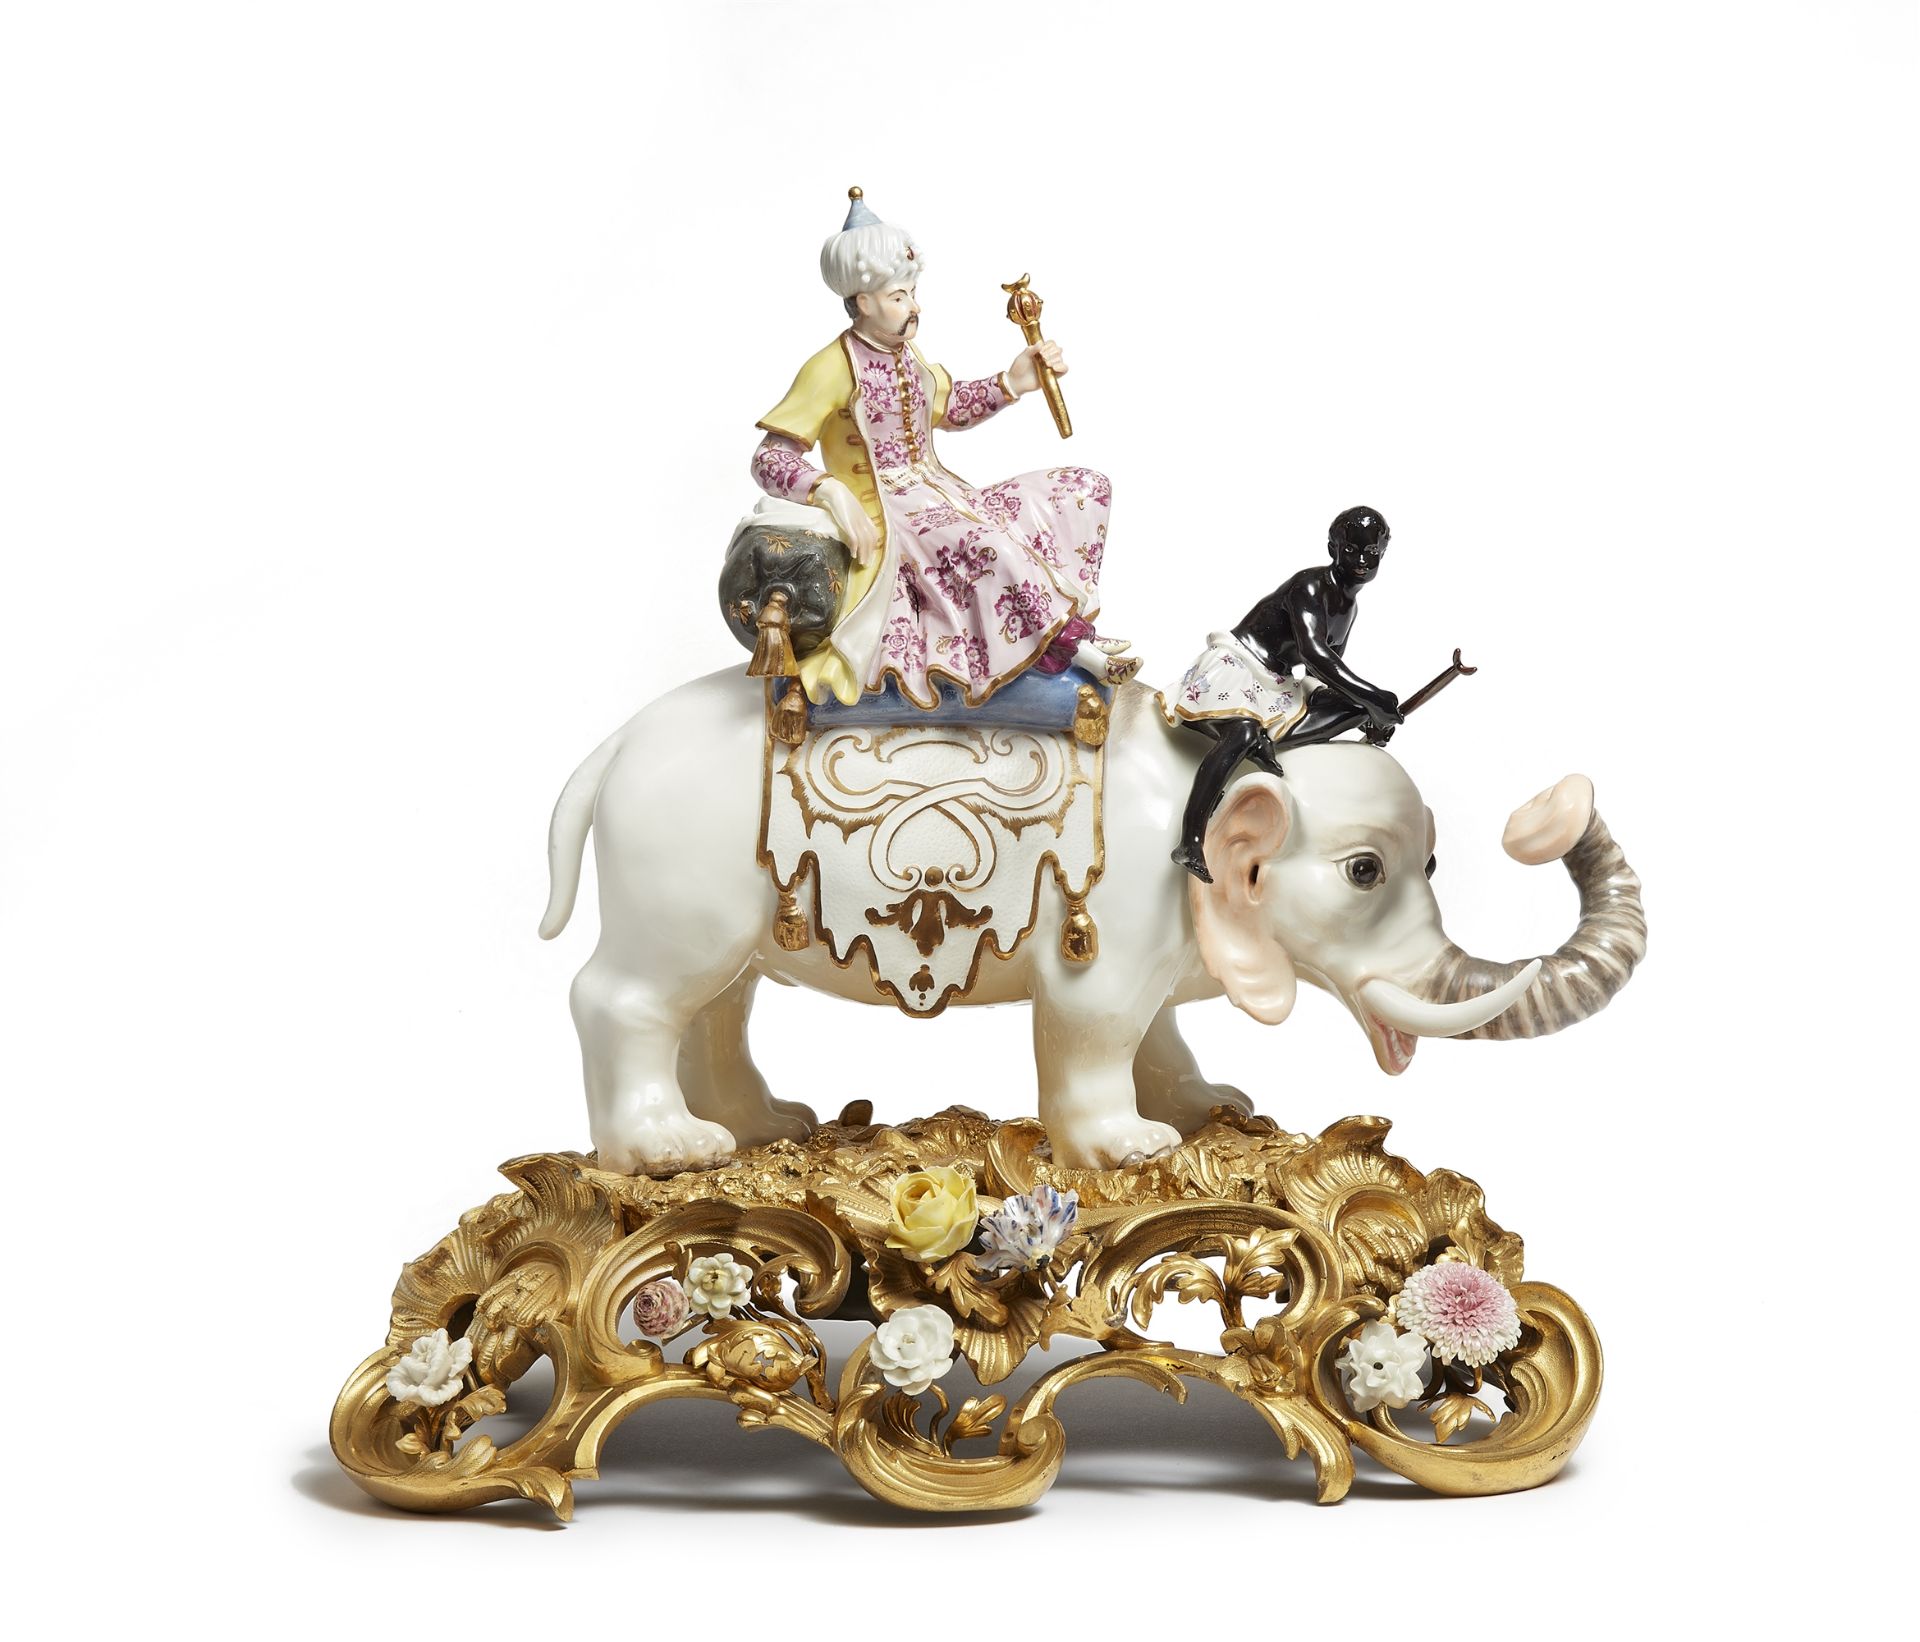 A Meissen porcelain model of a Sultan and an African on an elephant